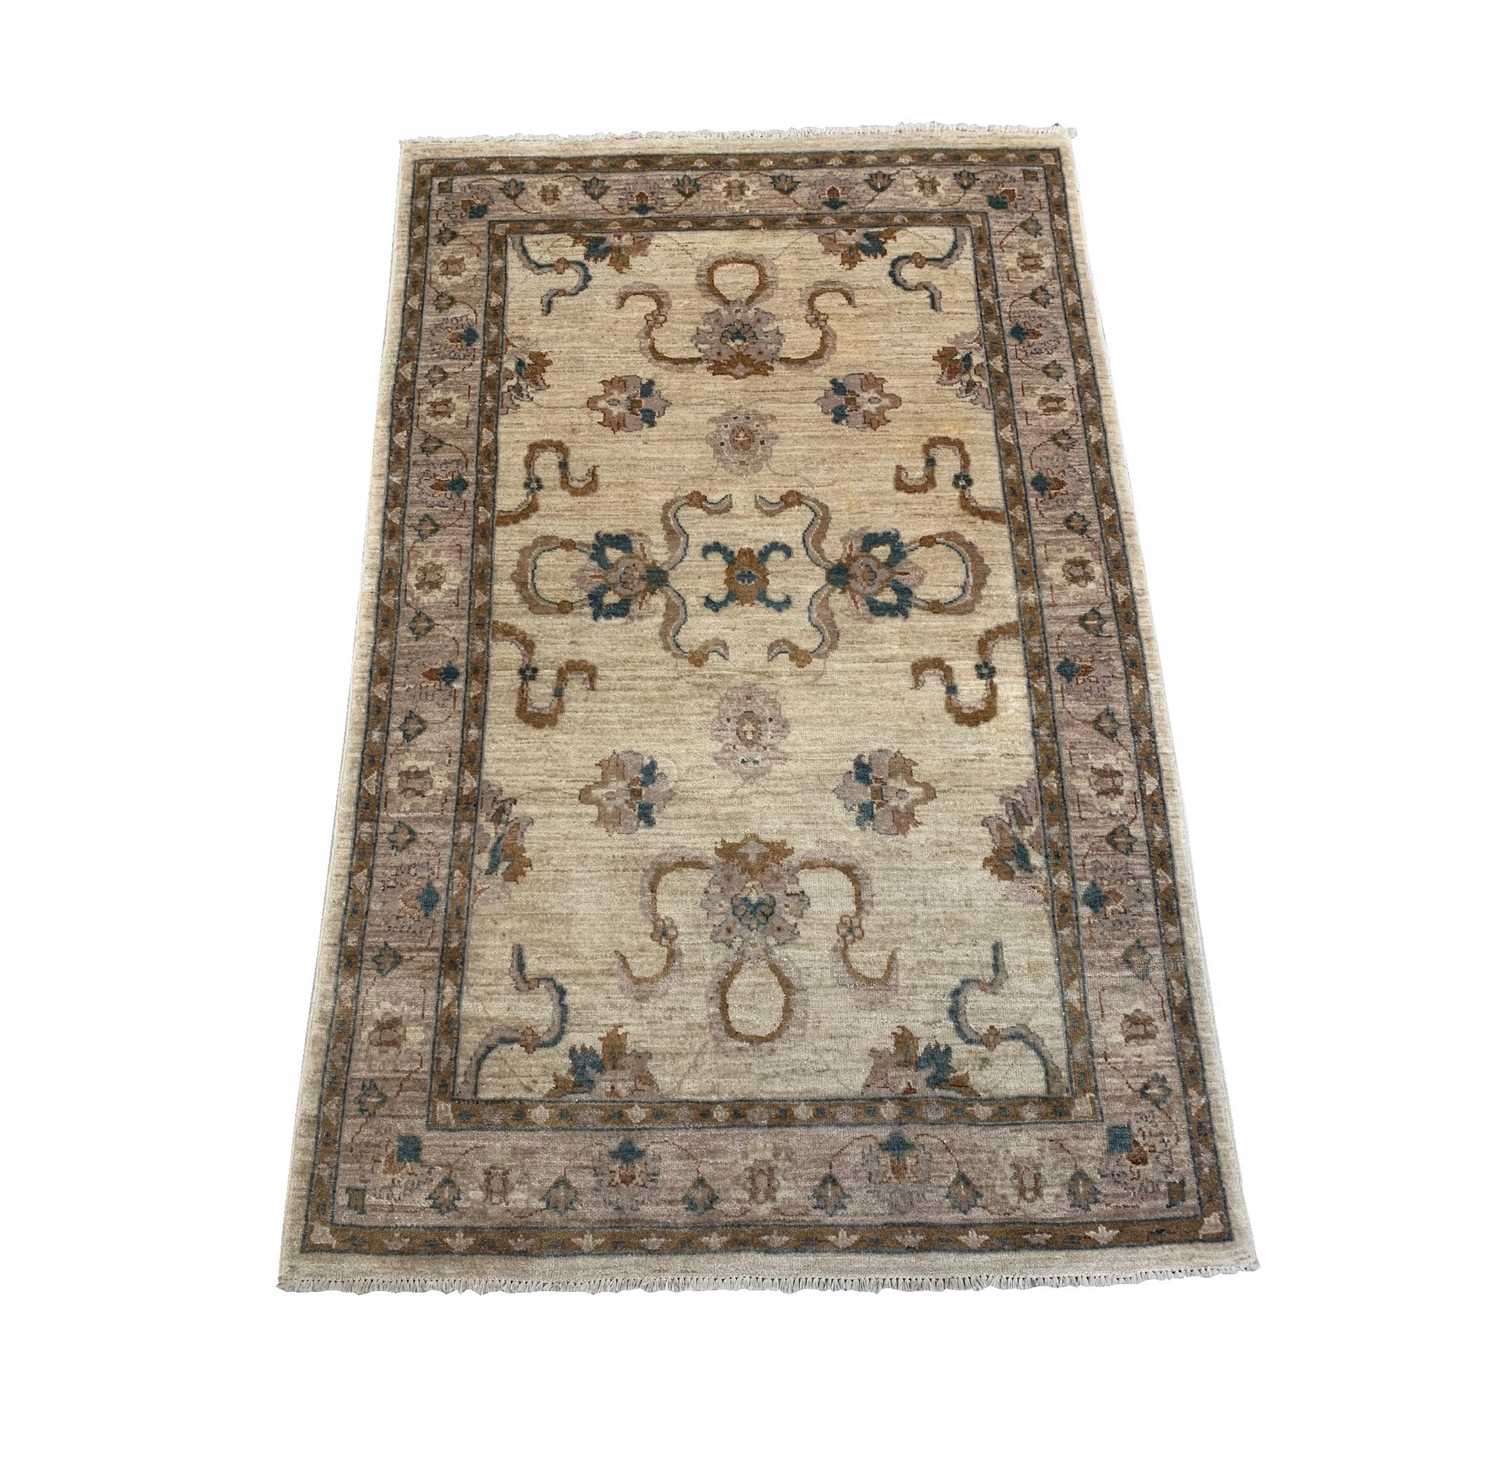 A Ziegler Chobi rug, the ivory field with palmettes and flowering vines, within a meandering